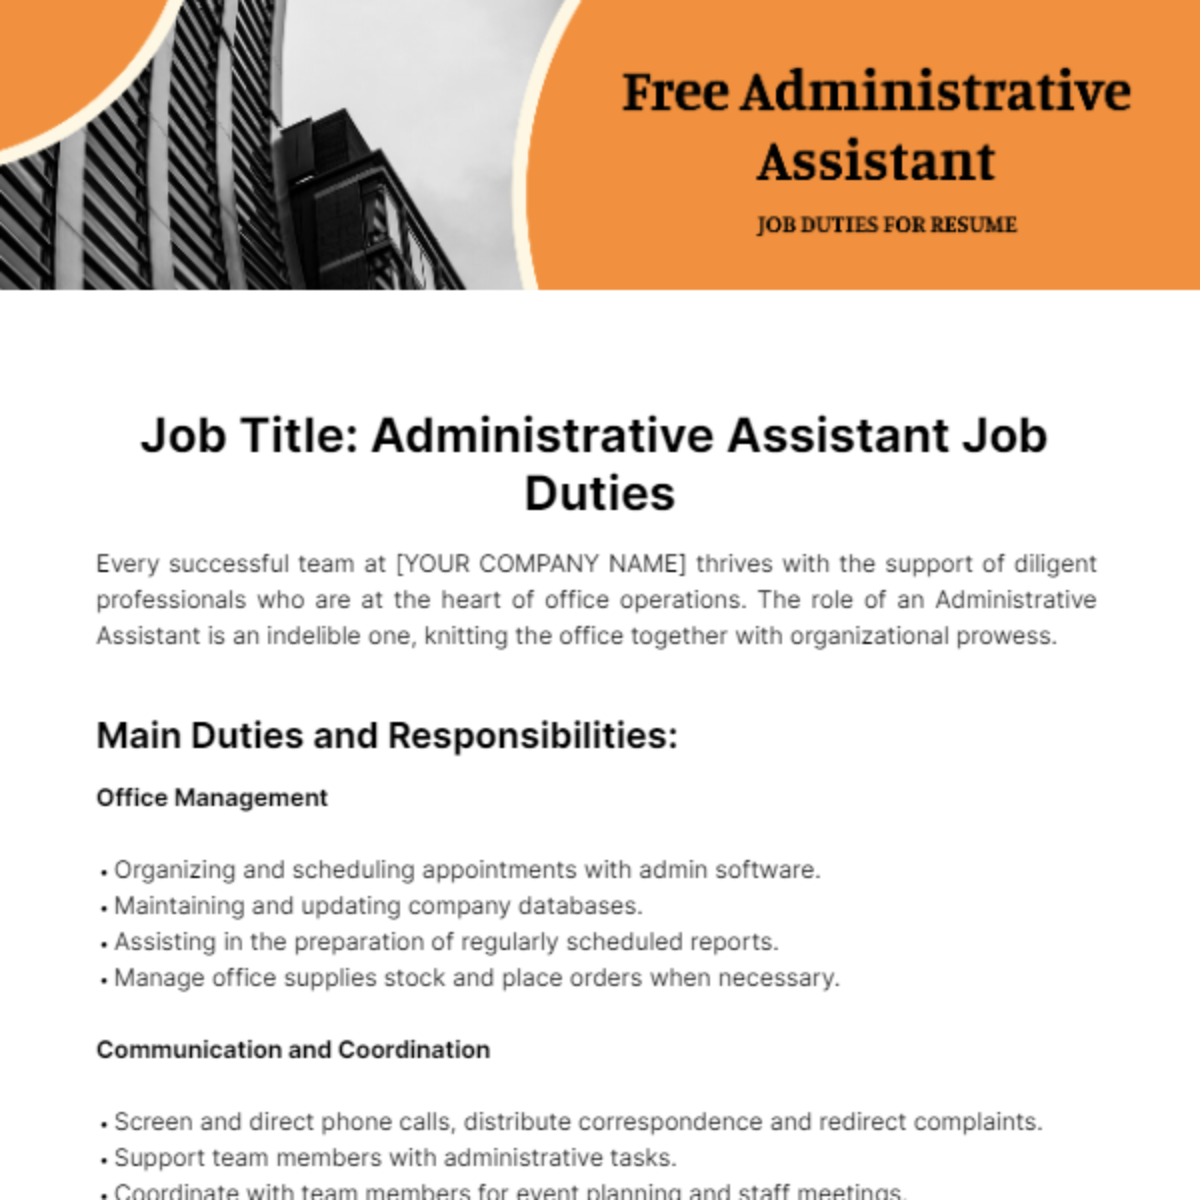 Free Administrative Assistant Job Duties for Resume Template